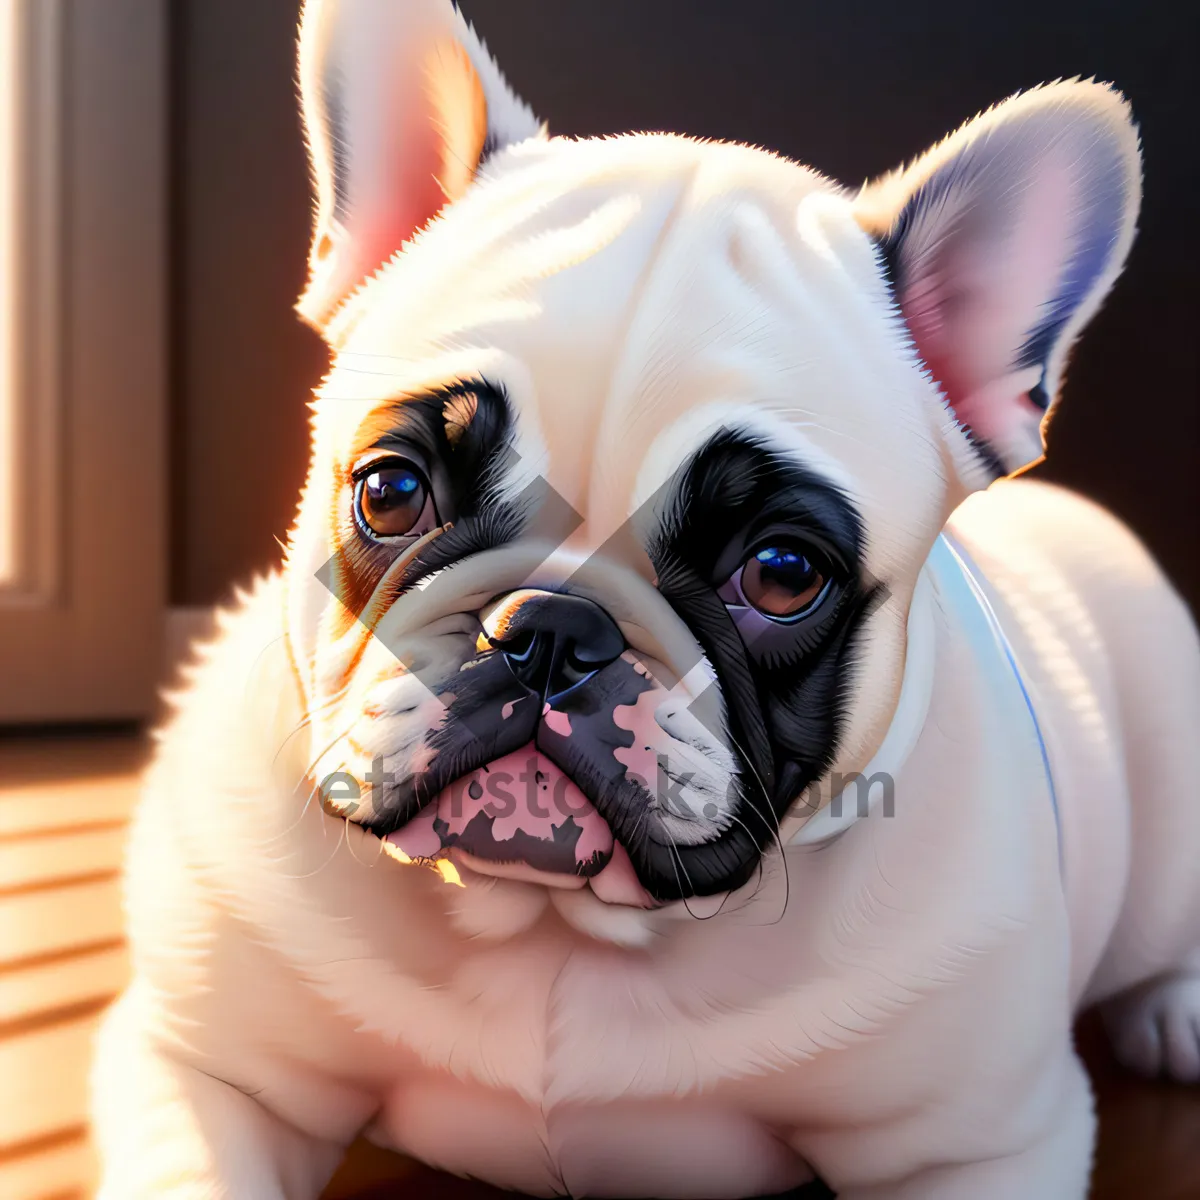 Picture of A heart-melting bulldog puppy with an endearing and touching gaze